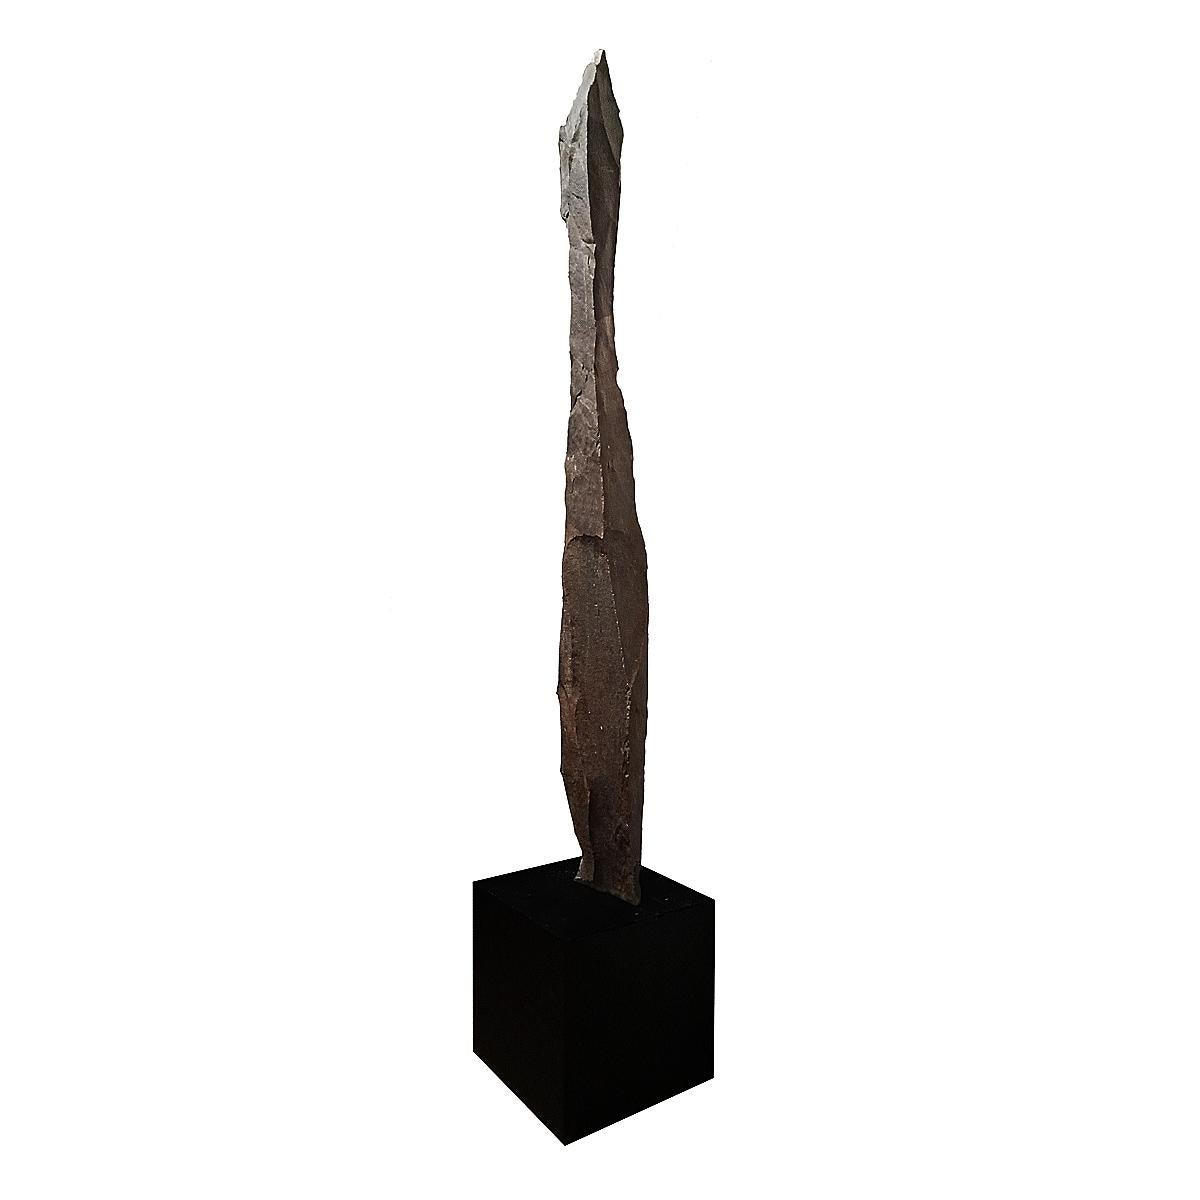 Organic Modern Large Indonesian Stone Sculpture on Stand For Sale